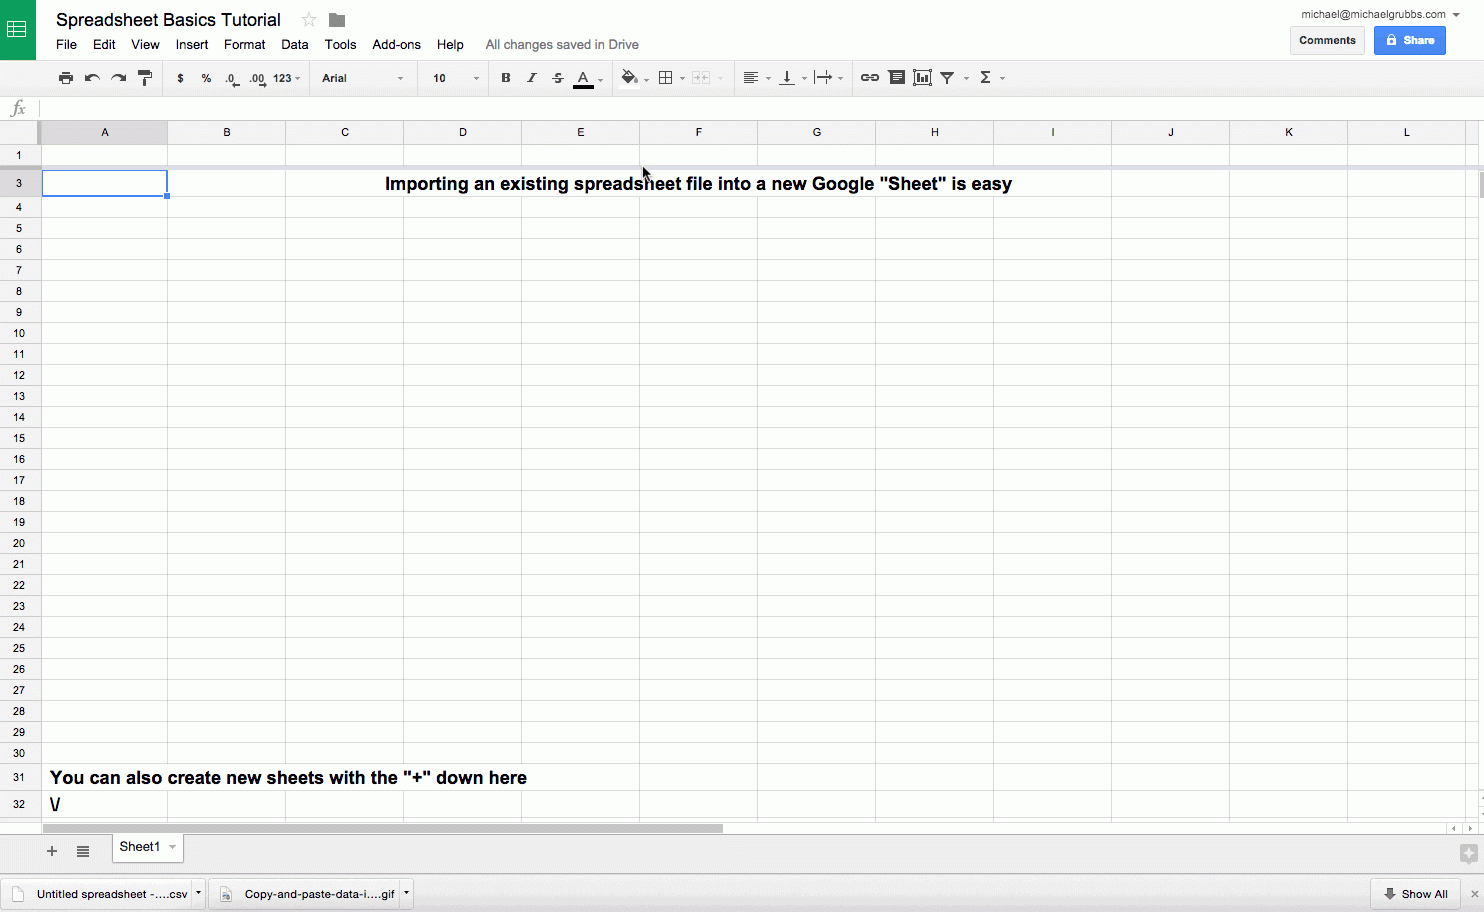 Build A Spreadsheet Online In Google Sheets 101: The Beginner's Guide To Online Spreadsheets  The